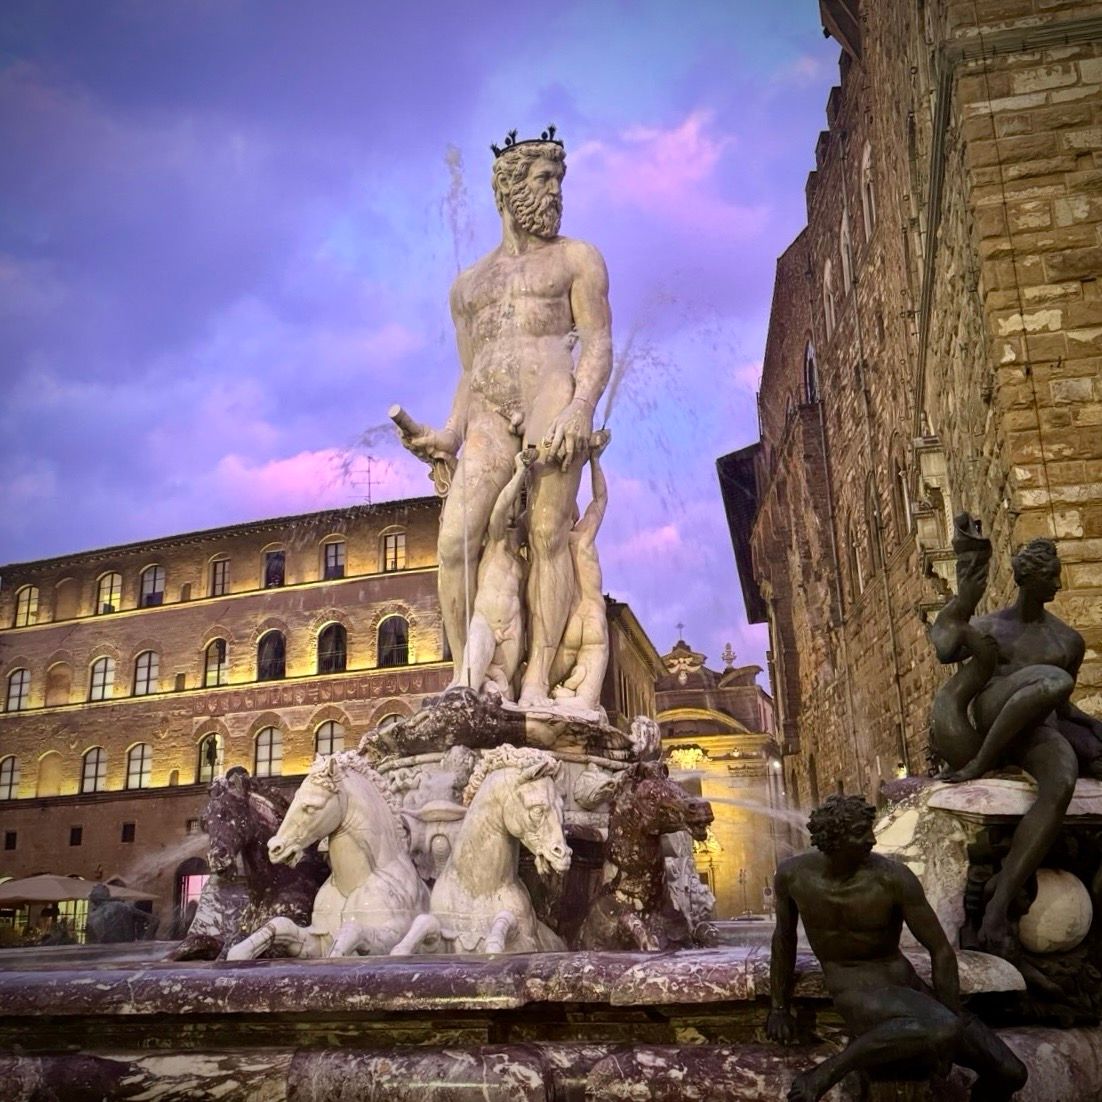 Twilight serenade by Neptune himself! 🌌🔱 Bathed in the dreamy hues of dusk, this regal fountain in Florence whispers tales of myth and marble. Who needs a time machine when history stands eternal in the heart of Italy? #SculptureSaturday #TwilightTales #picturewham